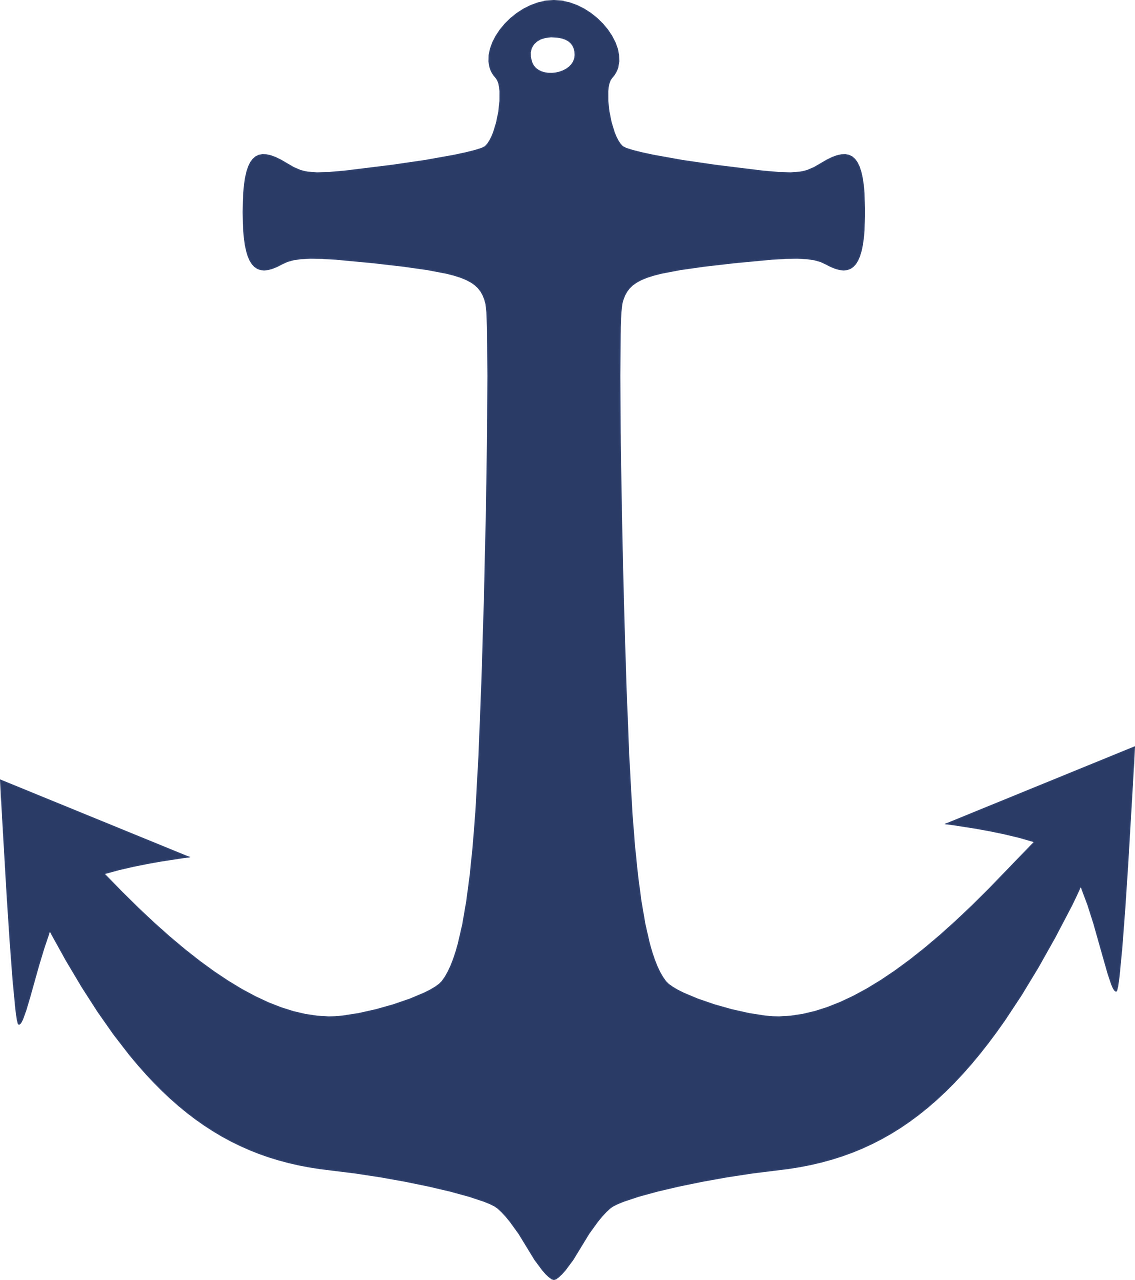 Anchor Clip art - Blue Anchor png download - 1135*1280 - Free ...